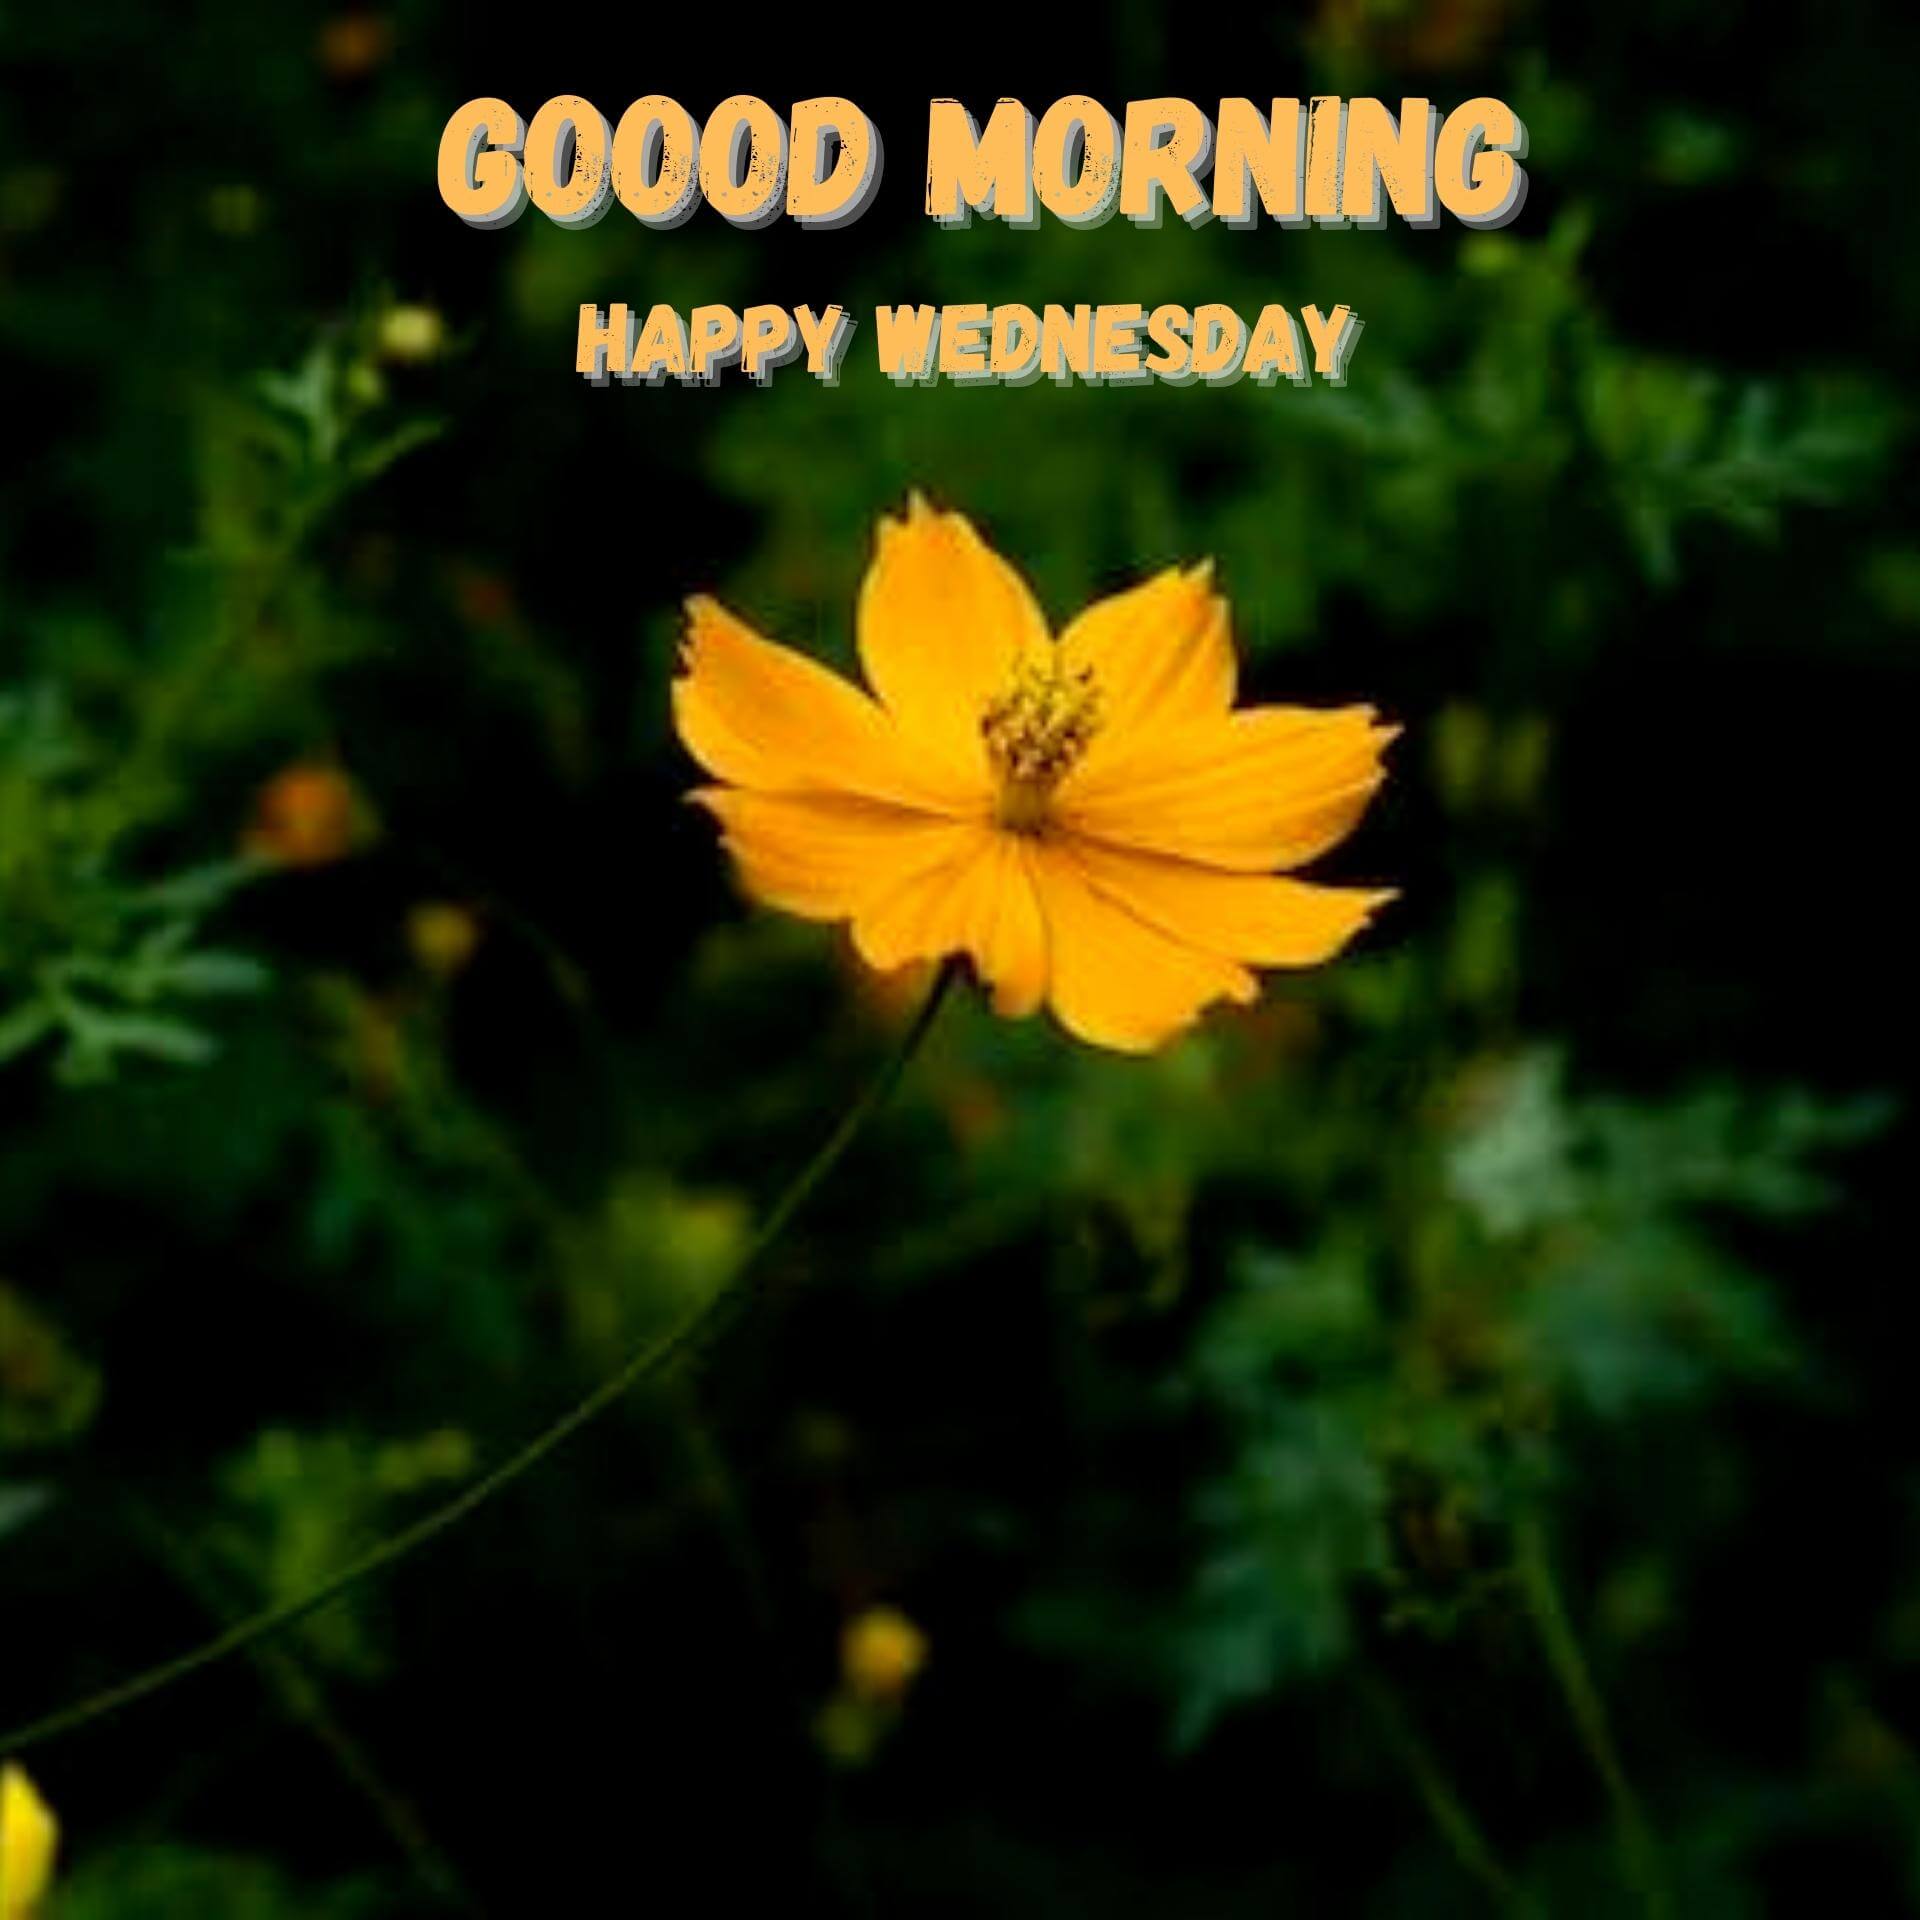 Wednesday good morning Pics Download Free Download